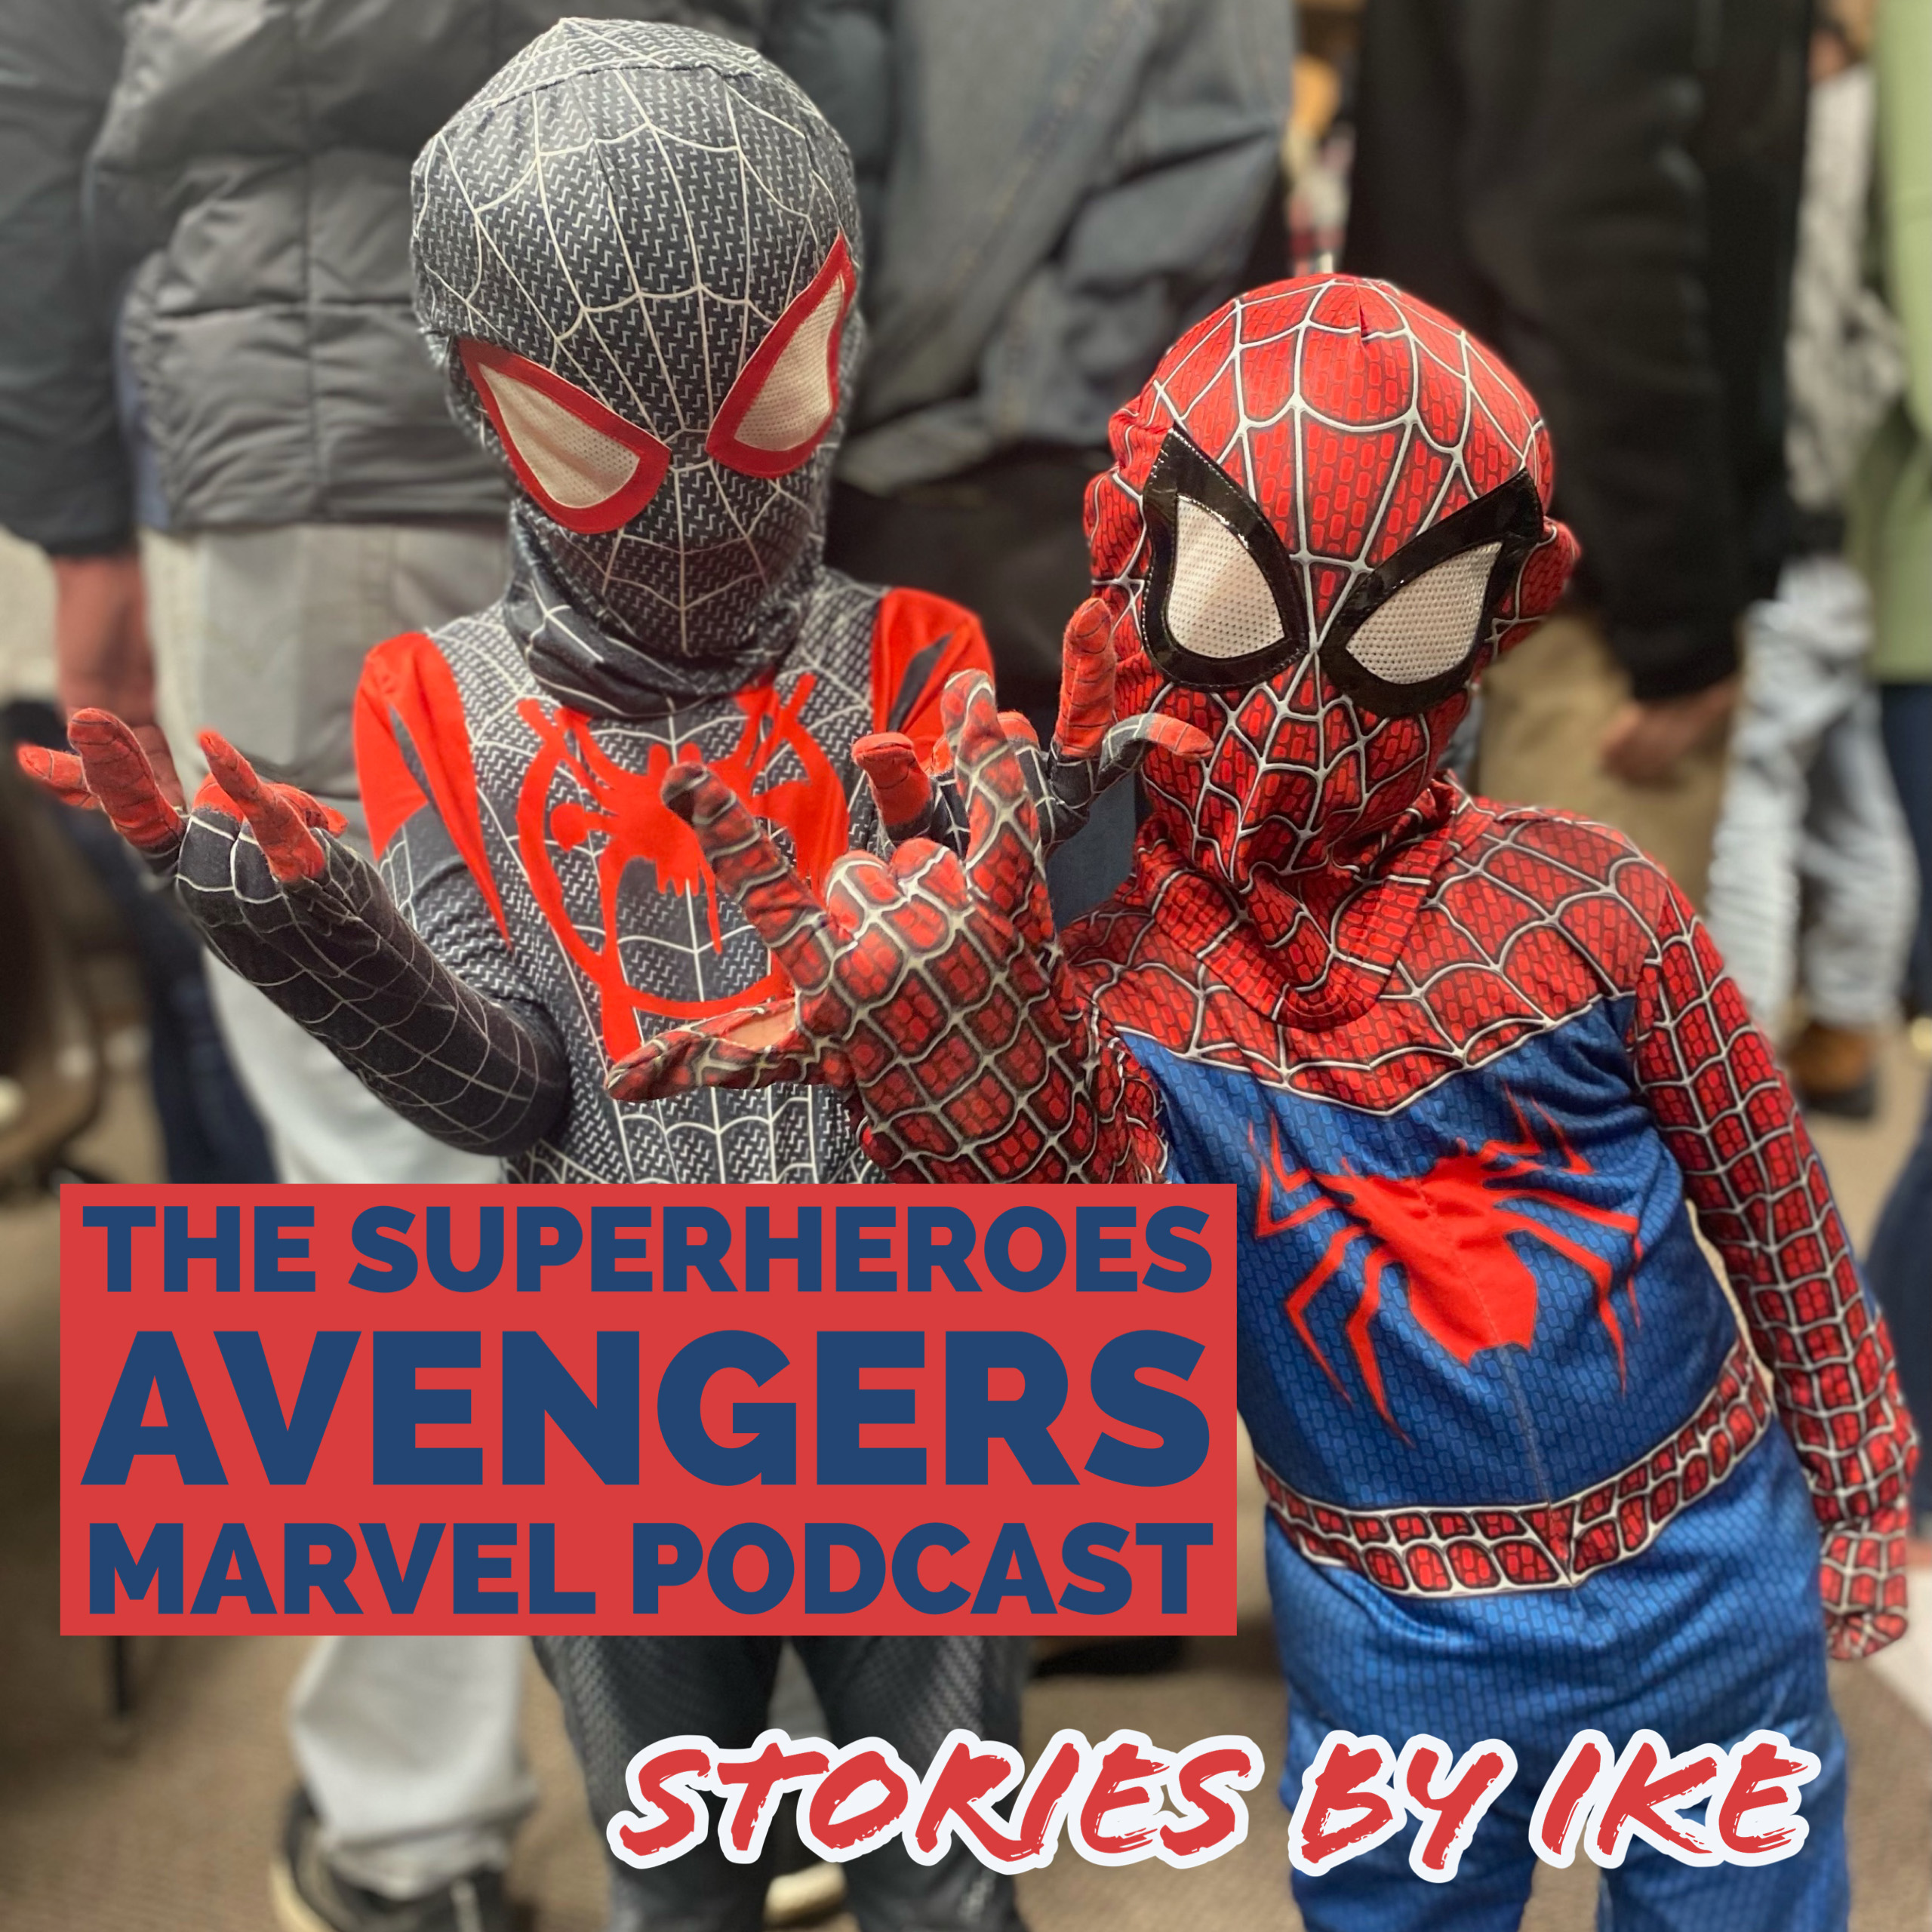 Artwork for The Superheroes Avengers Marvel Podcast - Stories by Ike